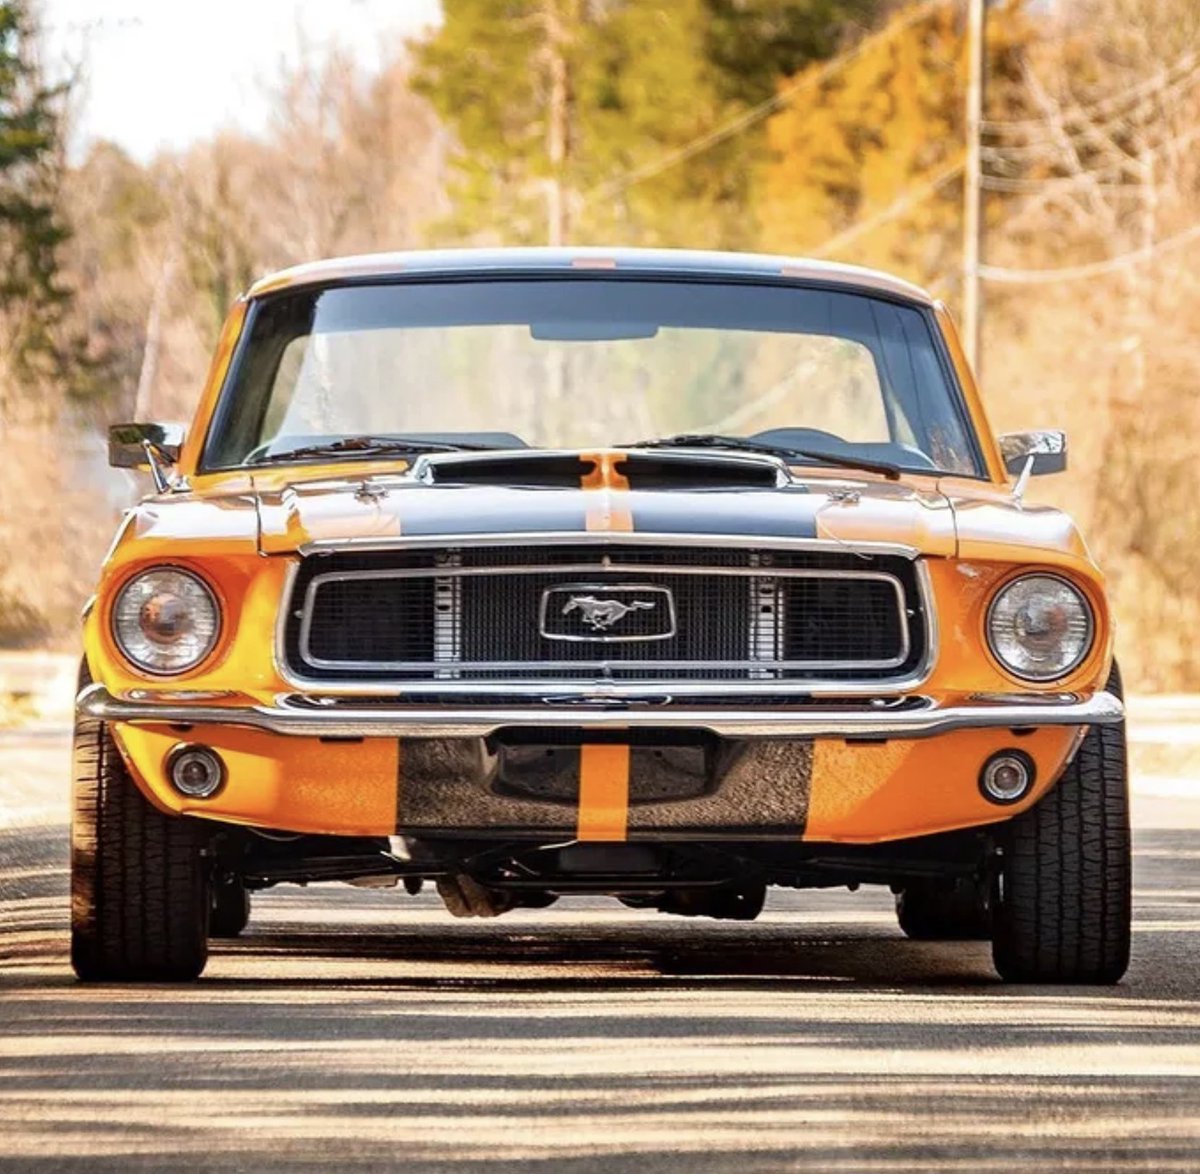 It’s hard not to smile when you say Grabber Orange. Check out mcfear and the 68 coupe pics on IG #classicmustang #mustangsofinstagram #mustangpodcast #americanmuscle #driveclassics #musclecar #mustangrestoration  